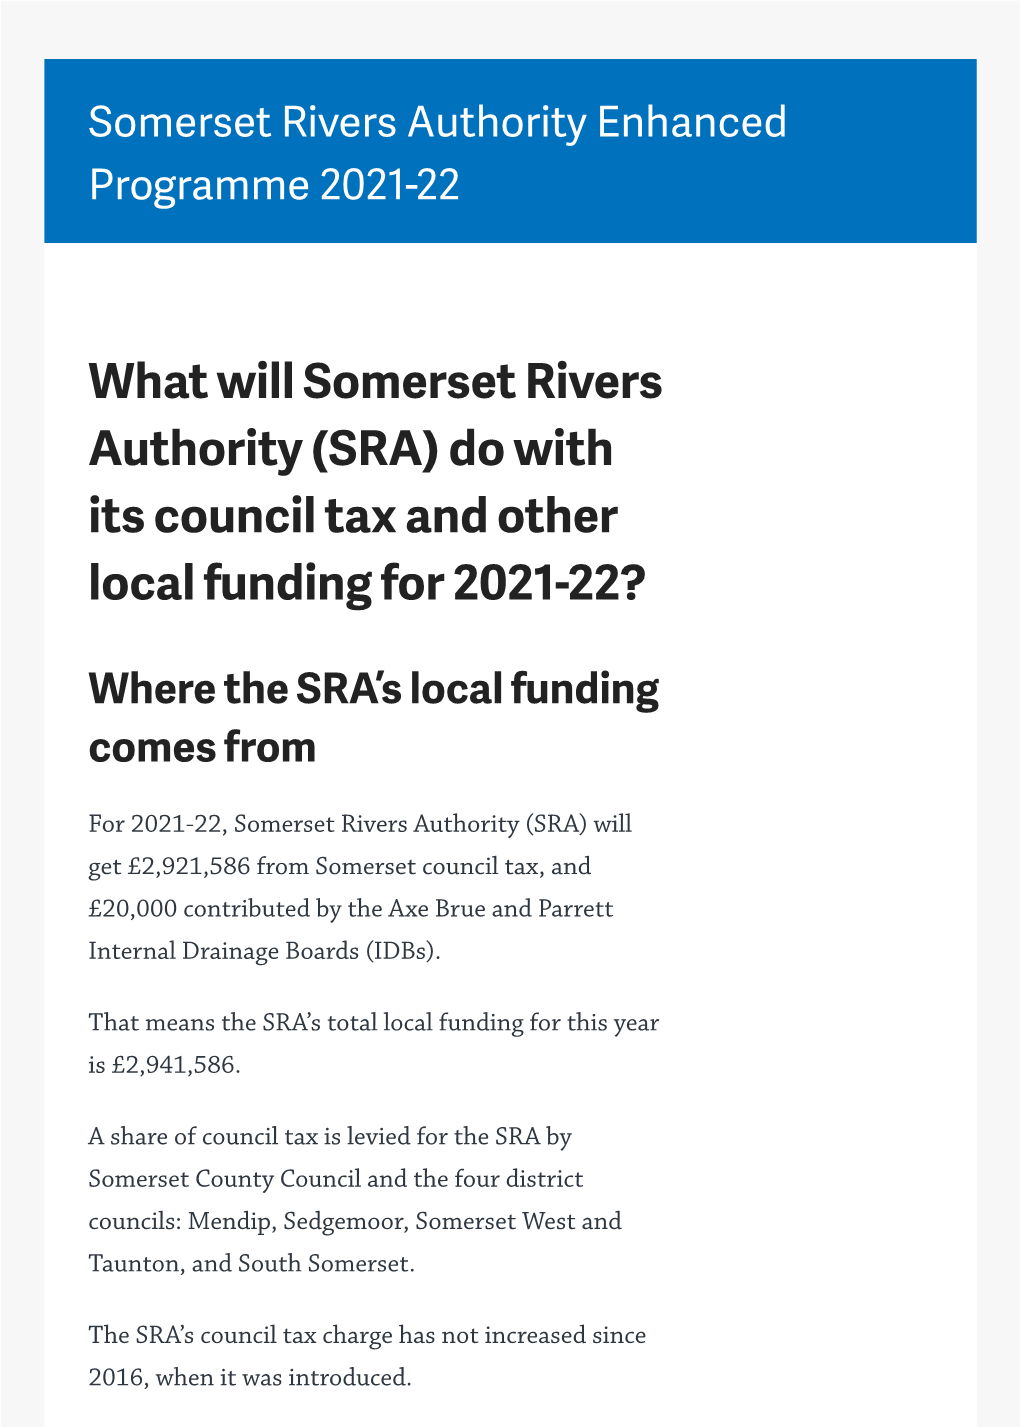 What Will Somerset Rivers Authority (SRA) Do with Its Council Tax and Other Local Funding for 2021-22?